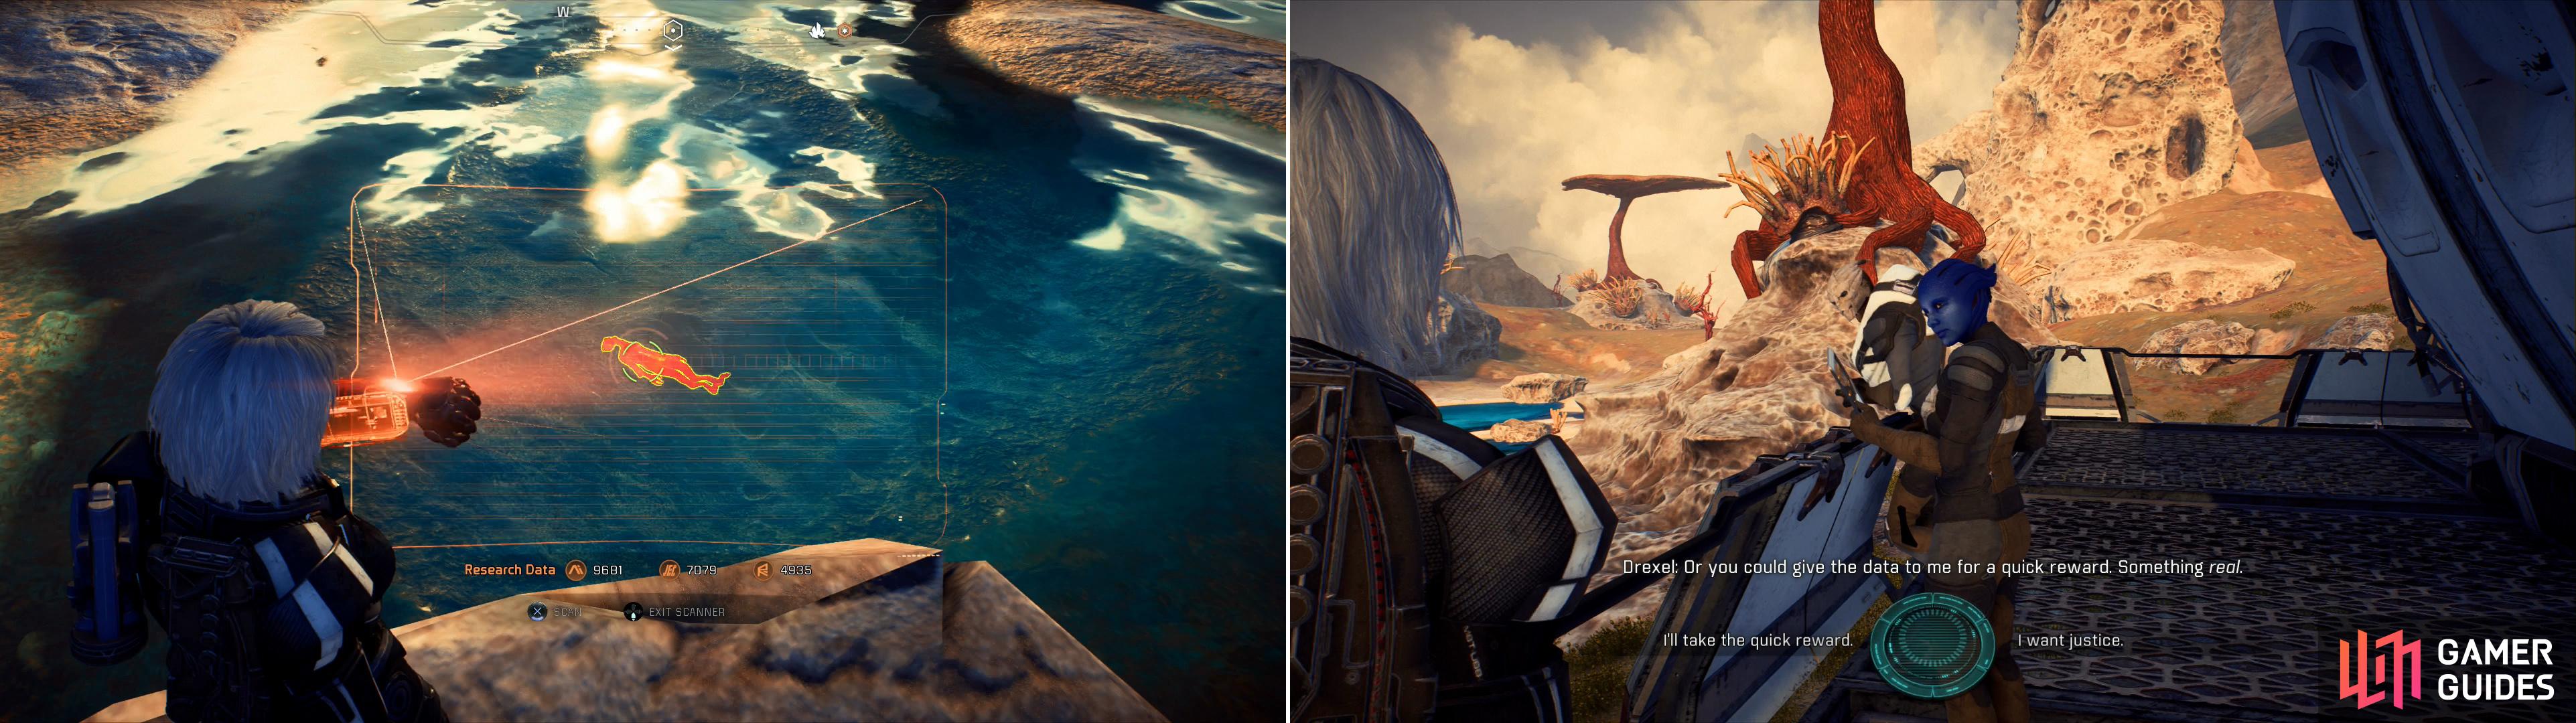 Around Kadara you'll find various bodies of water, which are being used as convenient dumping grounds for… bodies. Ironic. (left) Scan these bodies and return to Saneris and Drexel and choose between their offers (right).